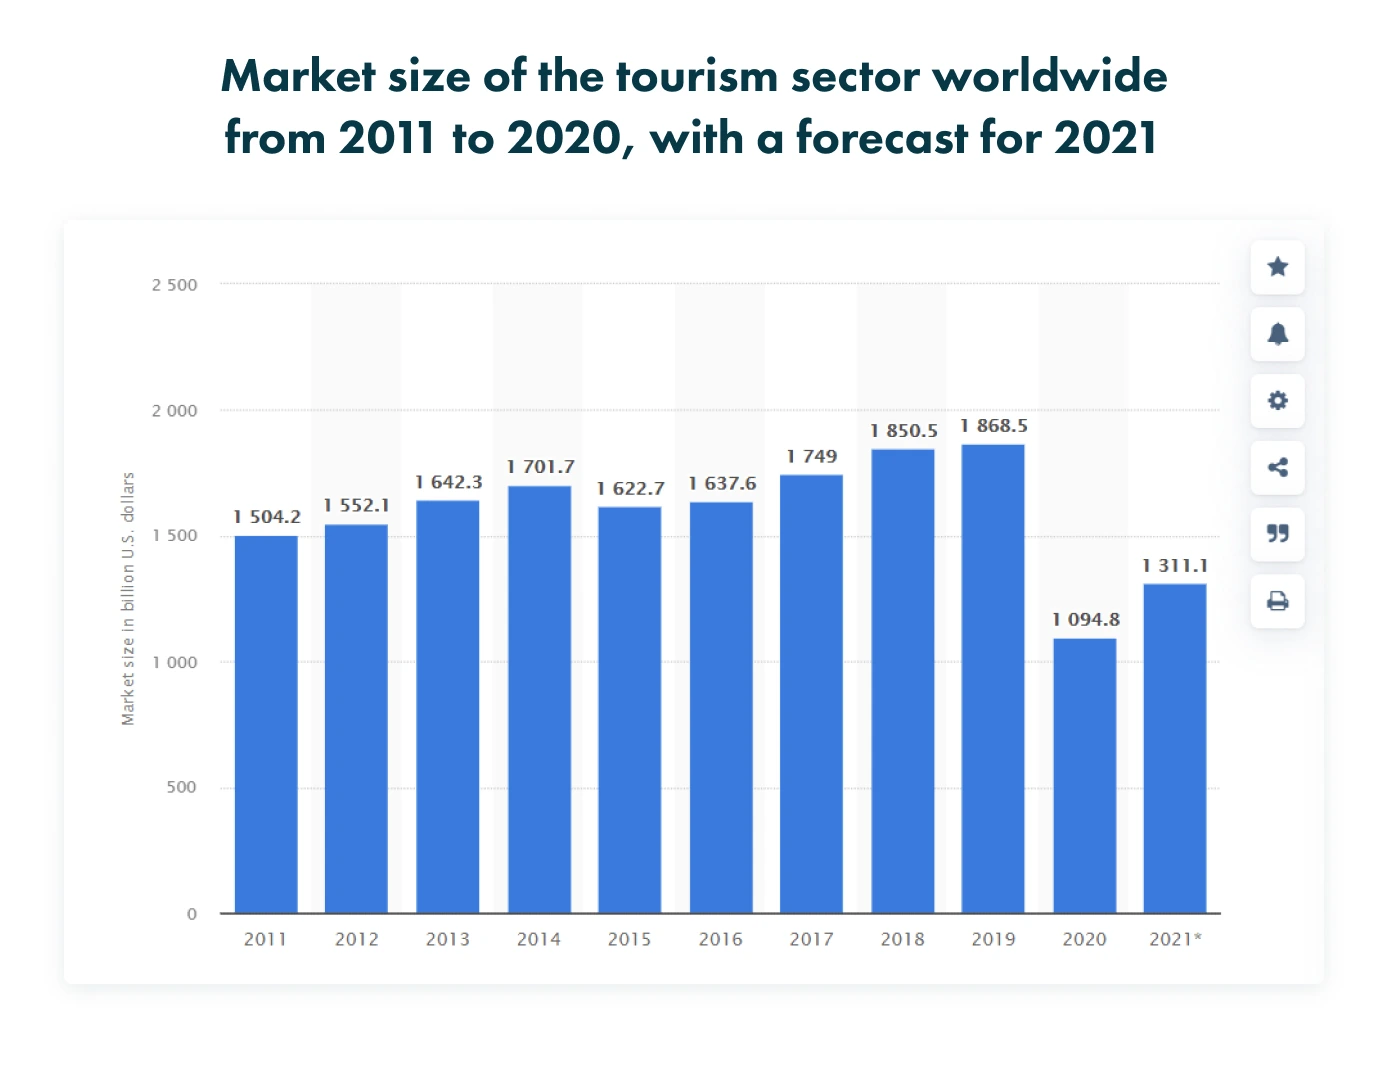 Market size of the tourism sector worldwide from 2011 to 2020, with a forecast for 2021